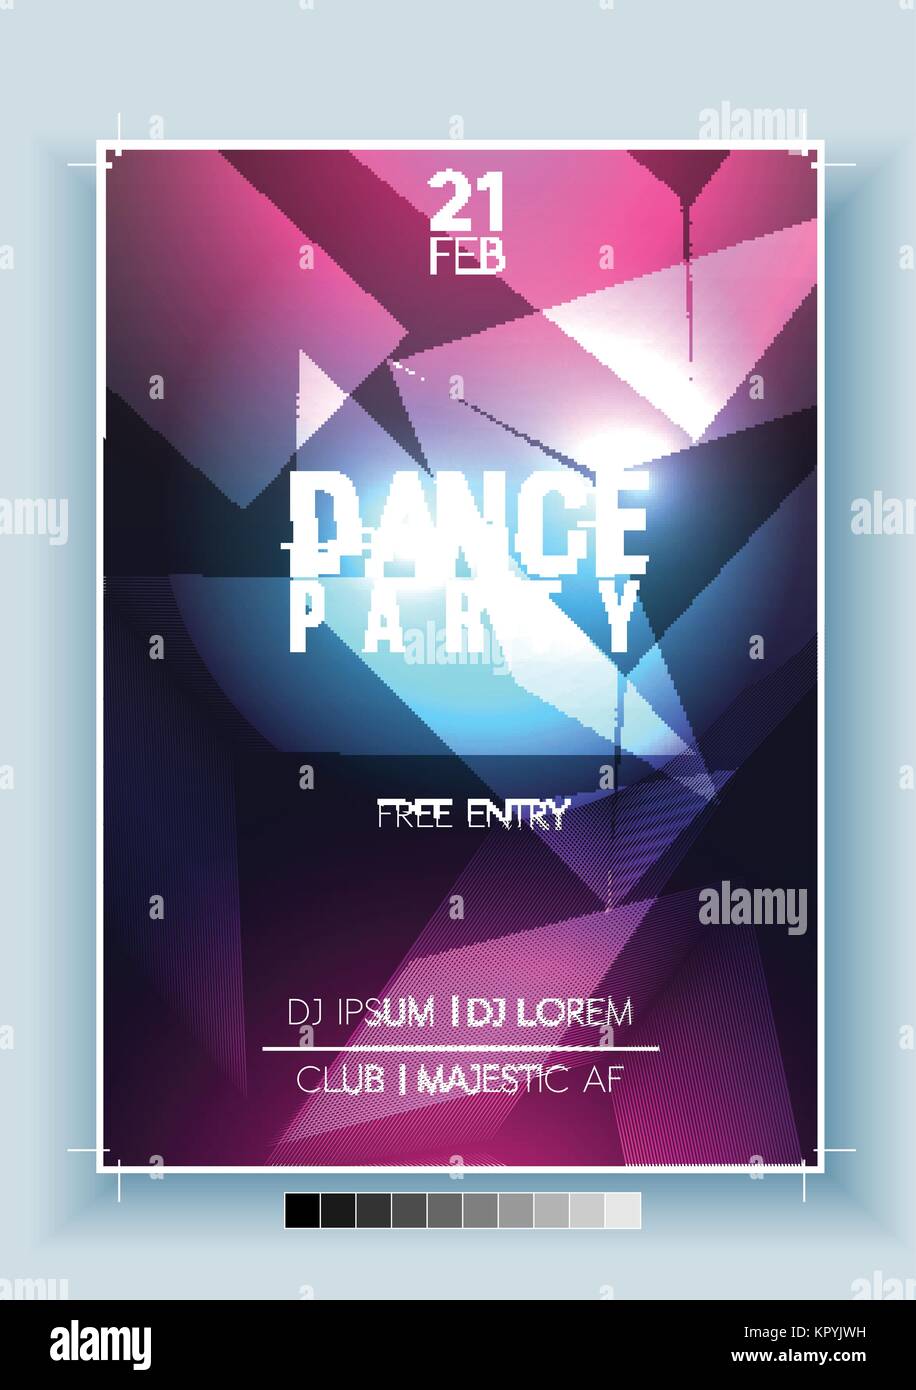 Abstract Dance Party Night Poster, Flyer modello - Illustrazione Vettoriale Illustrazione Vettoriale